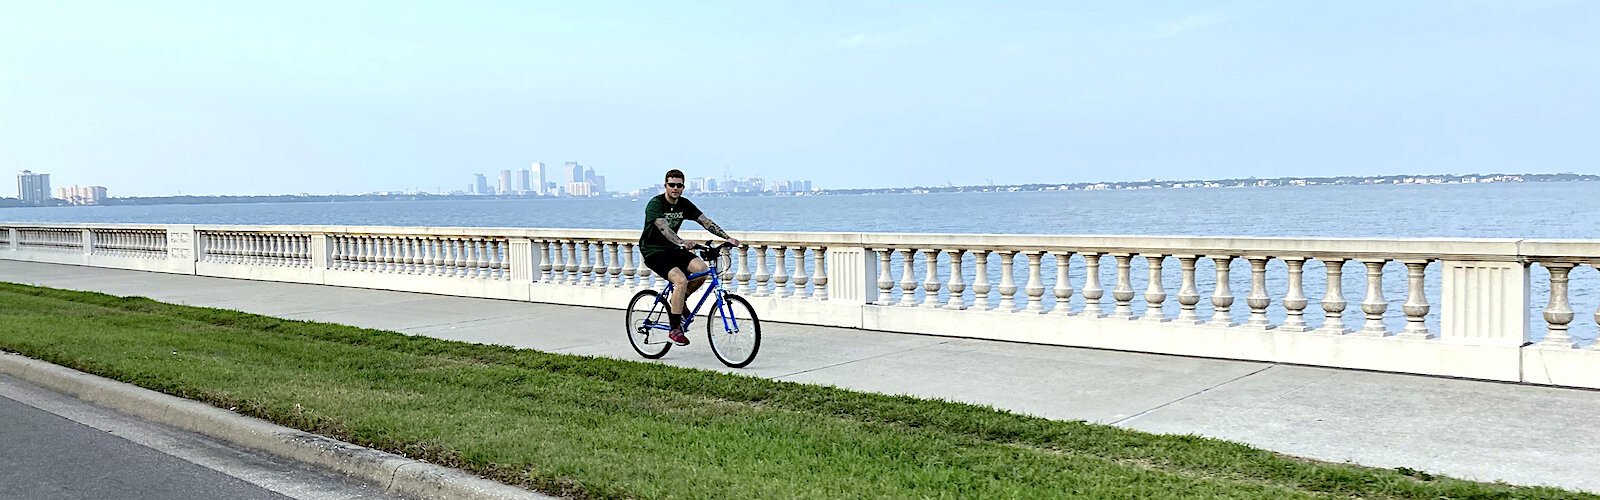 Daily visits along the waterfront in Tampa Bay help keep the coronavirus experience tolerable. 